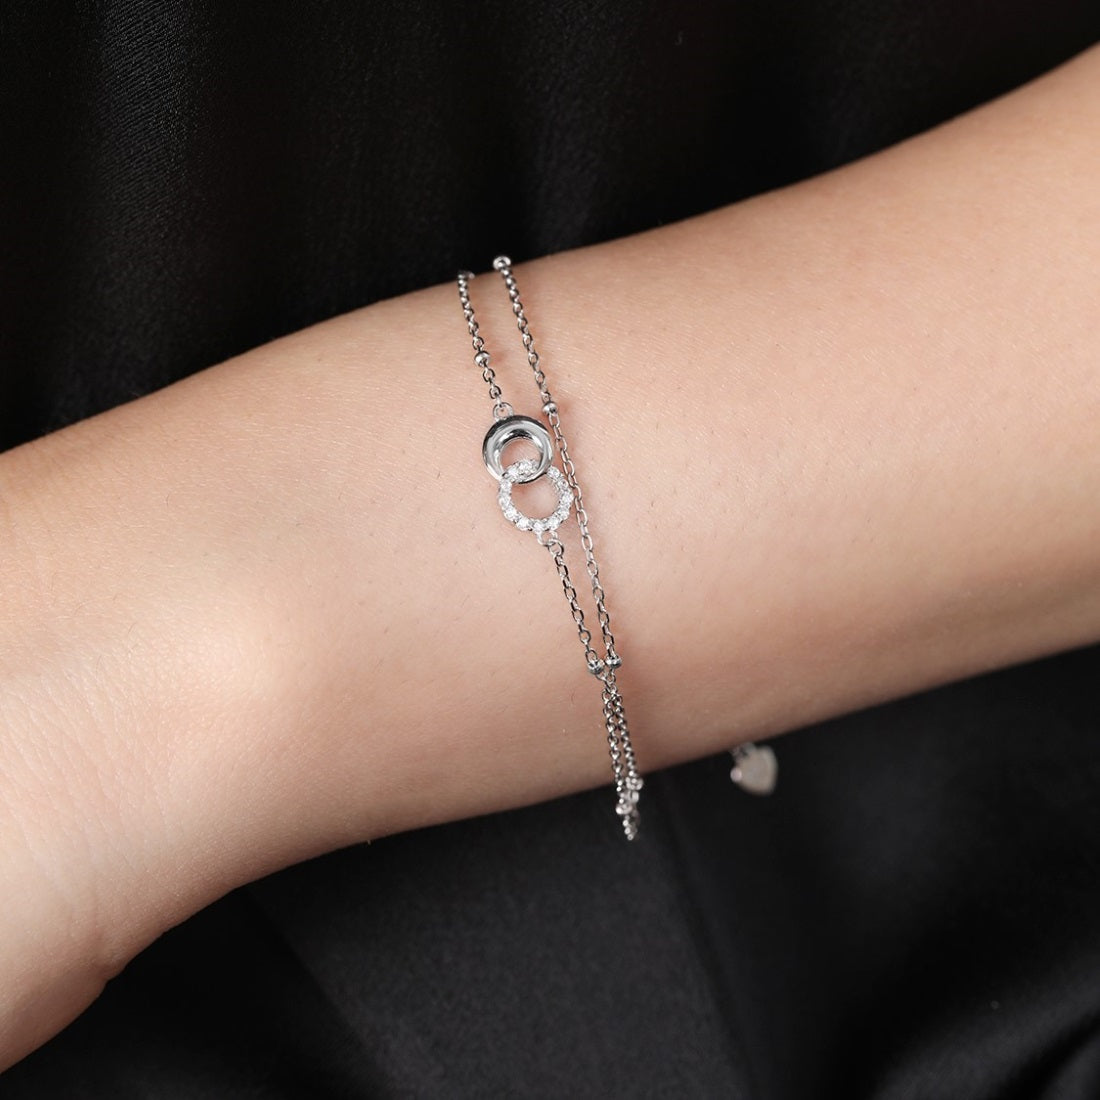 Dual Circle Radiance Rhodium Plated 925 Sterling Silver Bracelet